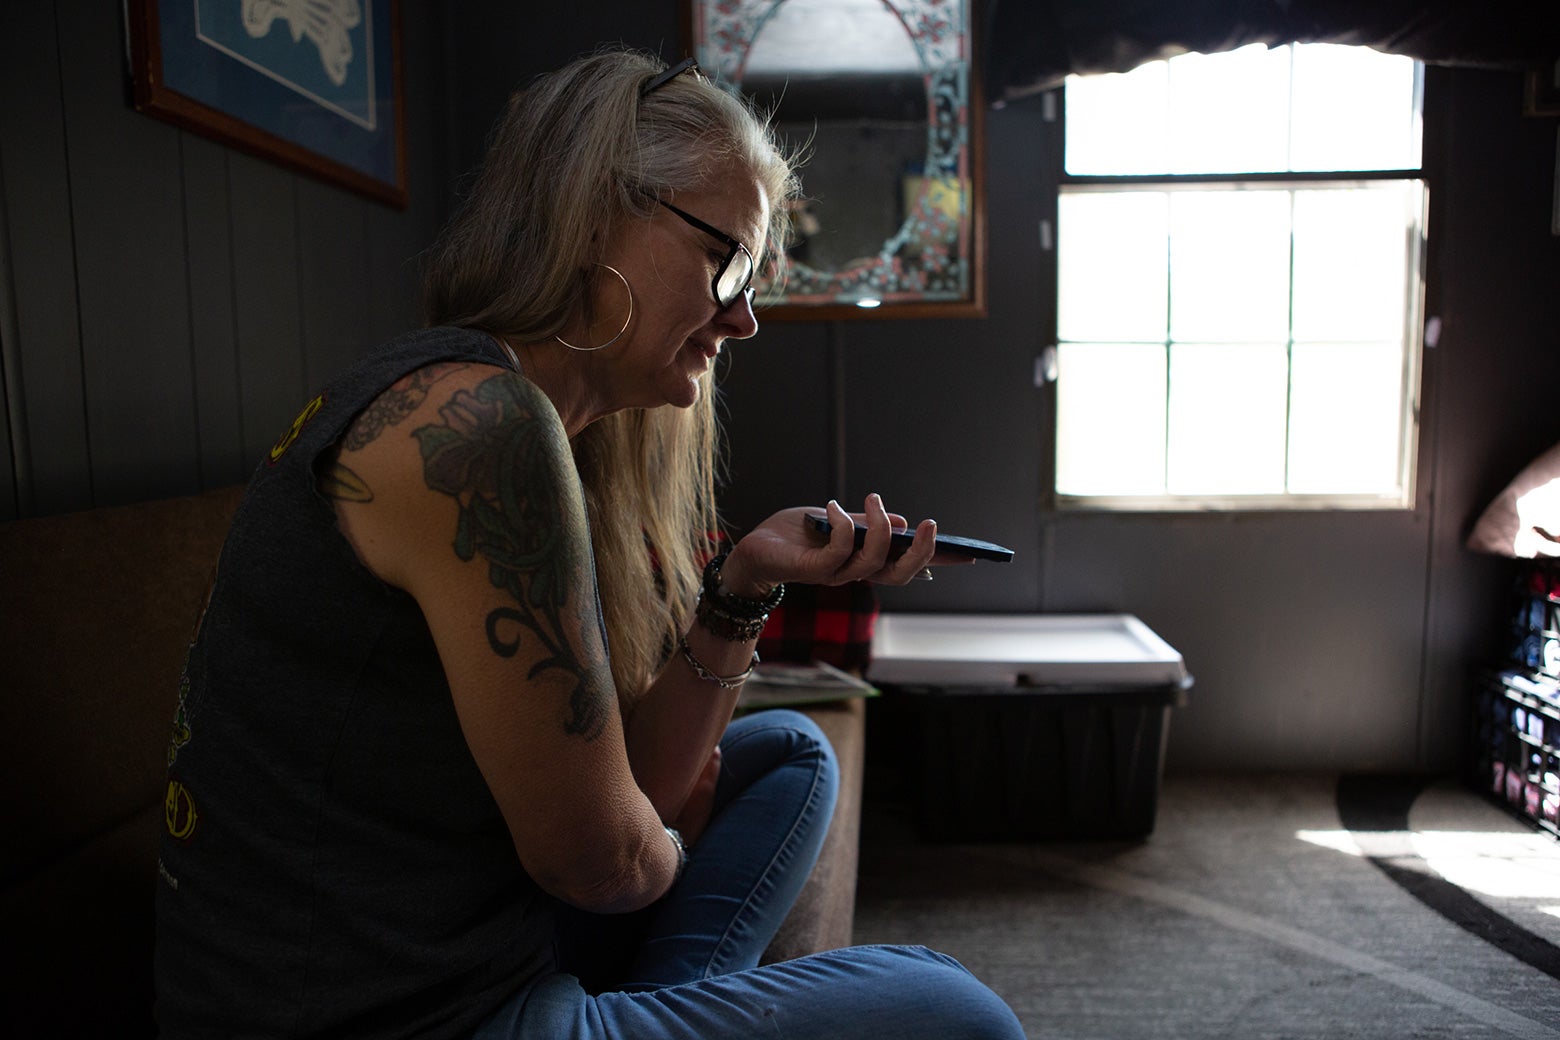 A white woman with long gray hair wearing glasses sits on a couch in a living room and talks into a phone on speakerphone.